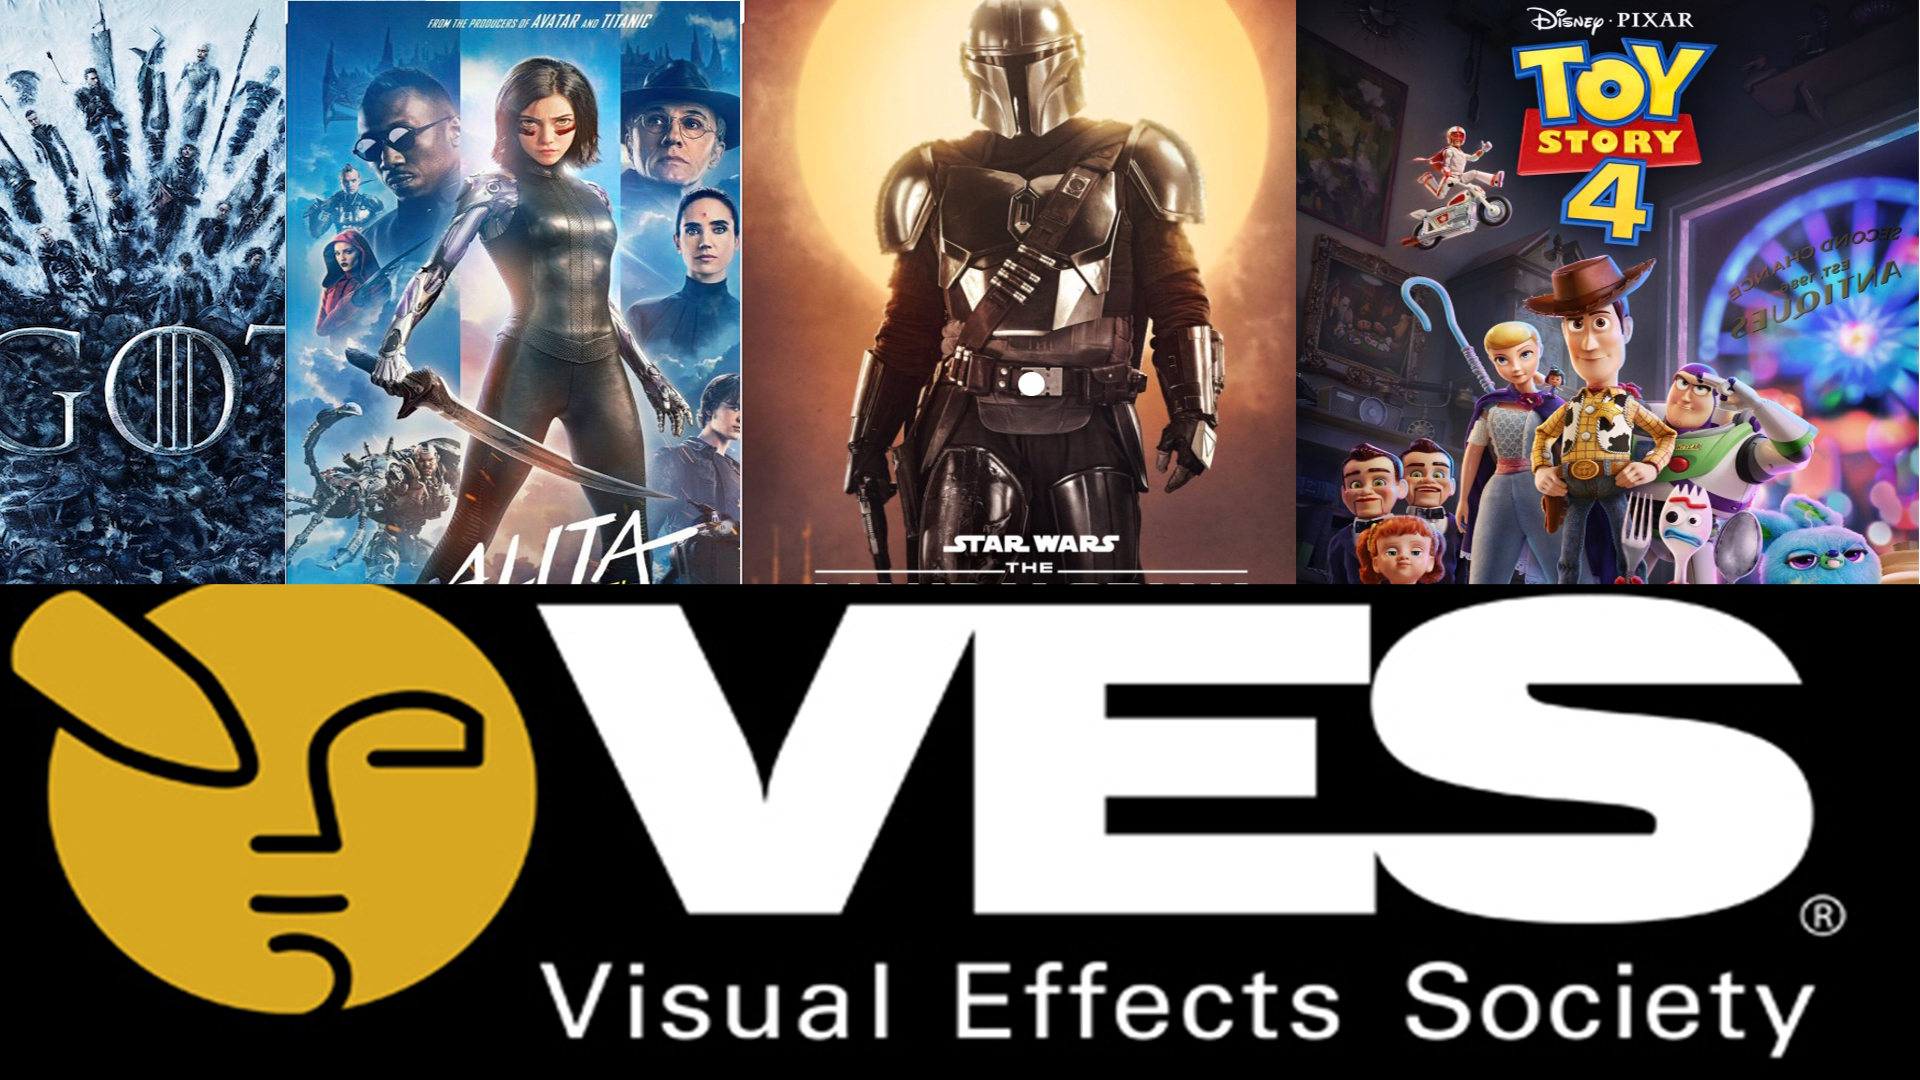 The 18th Annual Visual Effects Society Awards Nominations are out